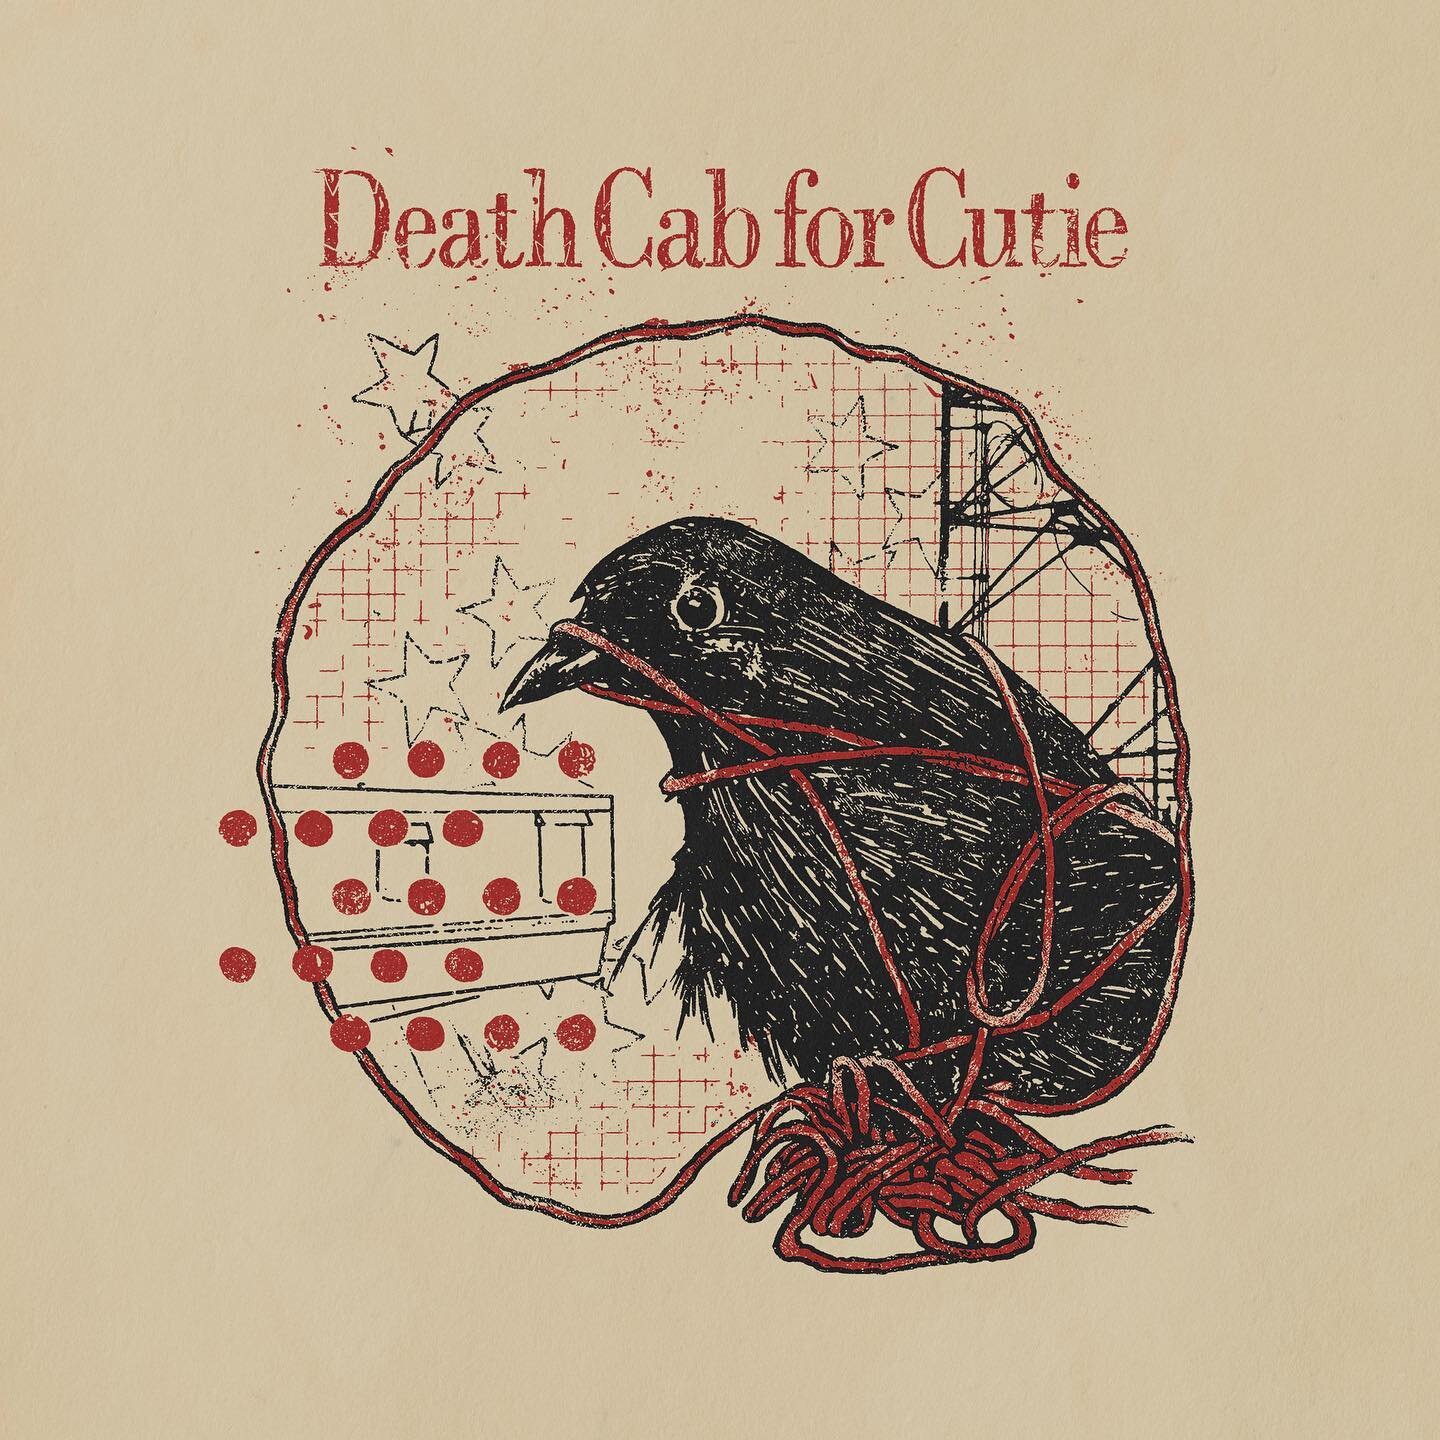 The design I had the honor to create for Death Cab for Cutie&rsquo;s 20th anniversary of Transatlanticism. 

It was fun to dig through the original album packaging and pull bits and pieces from it to form this. Can you spot the hidden &ldquo;20&rdquo